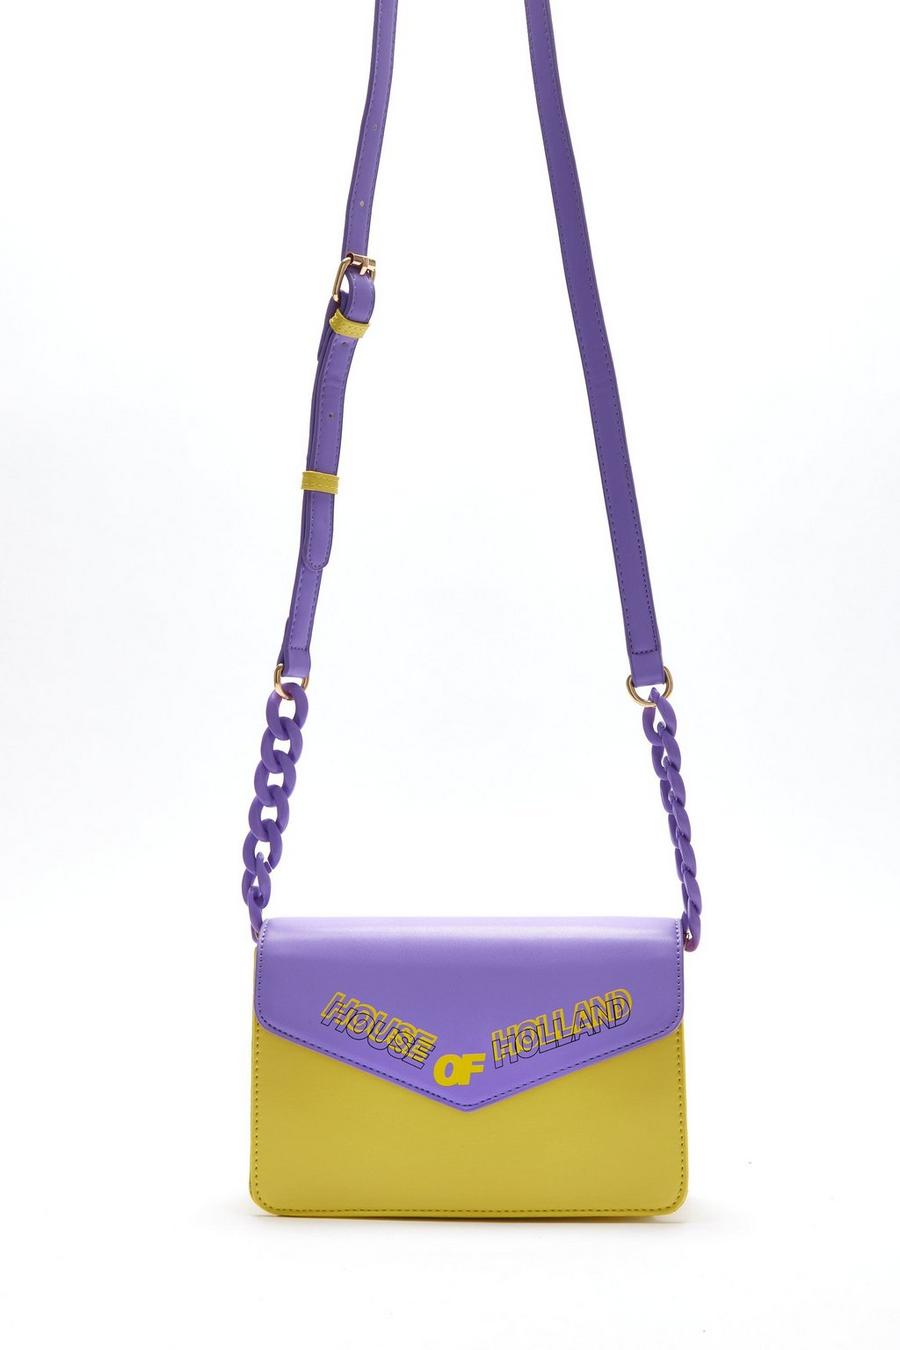 Multi Cross Body Bag In Purple And Yellow With A Chain Detail Strap And Printed Logo